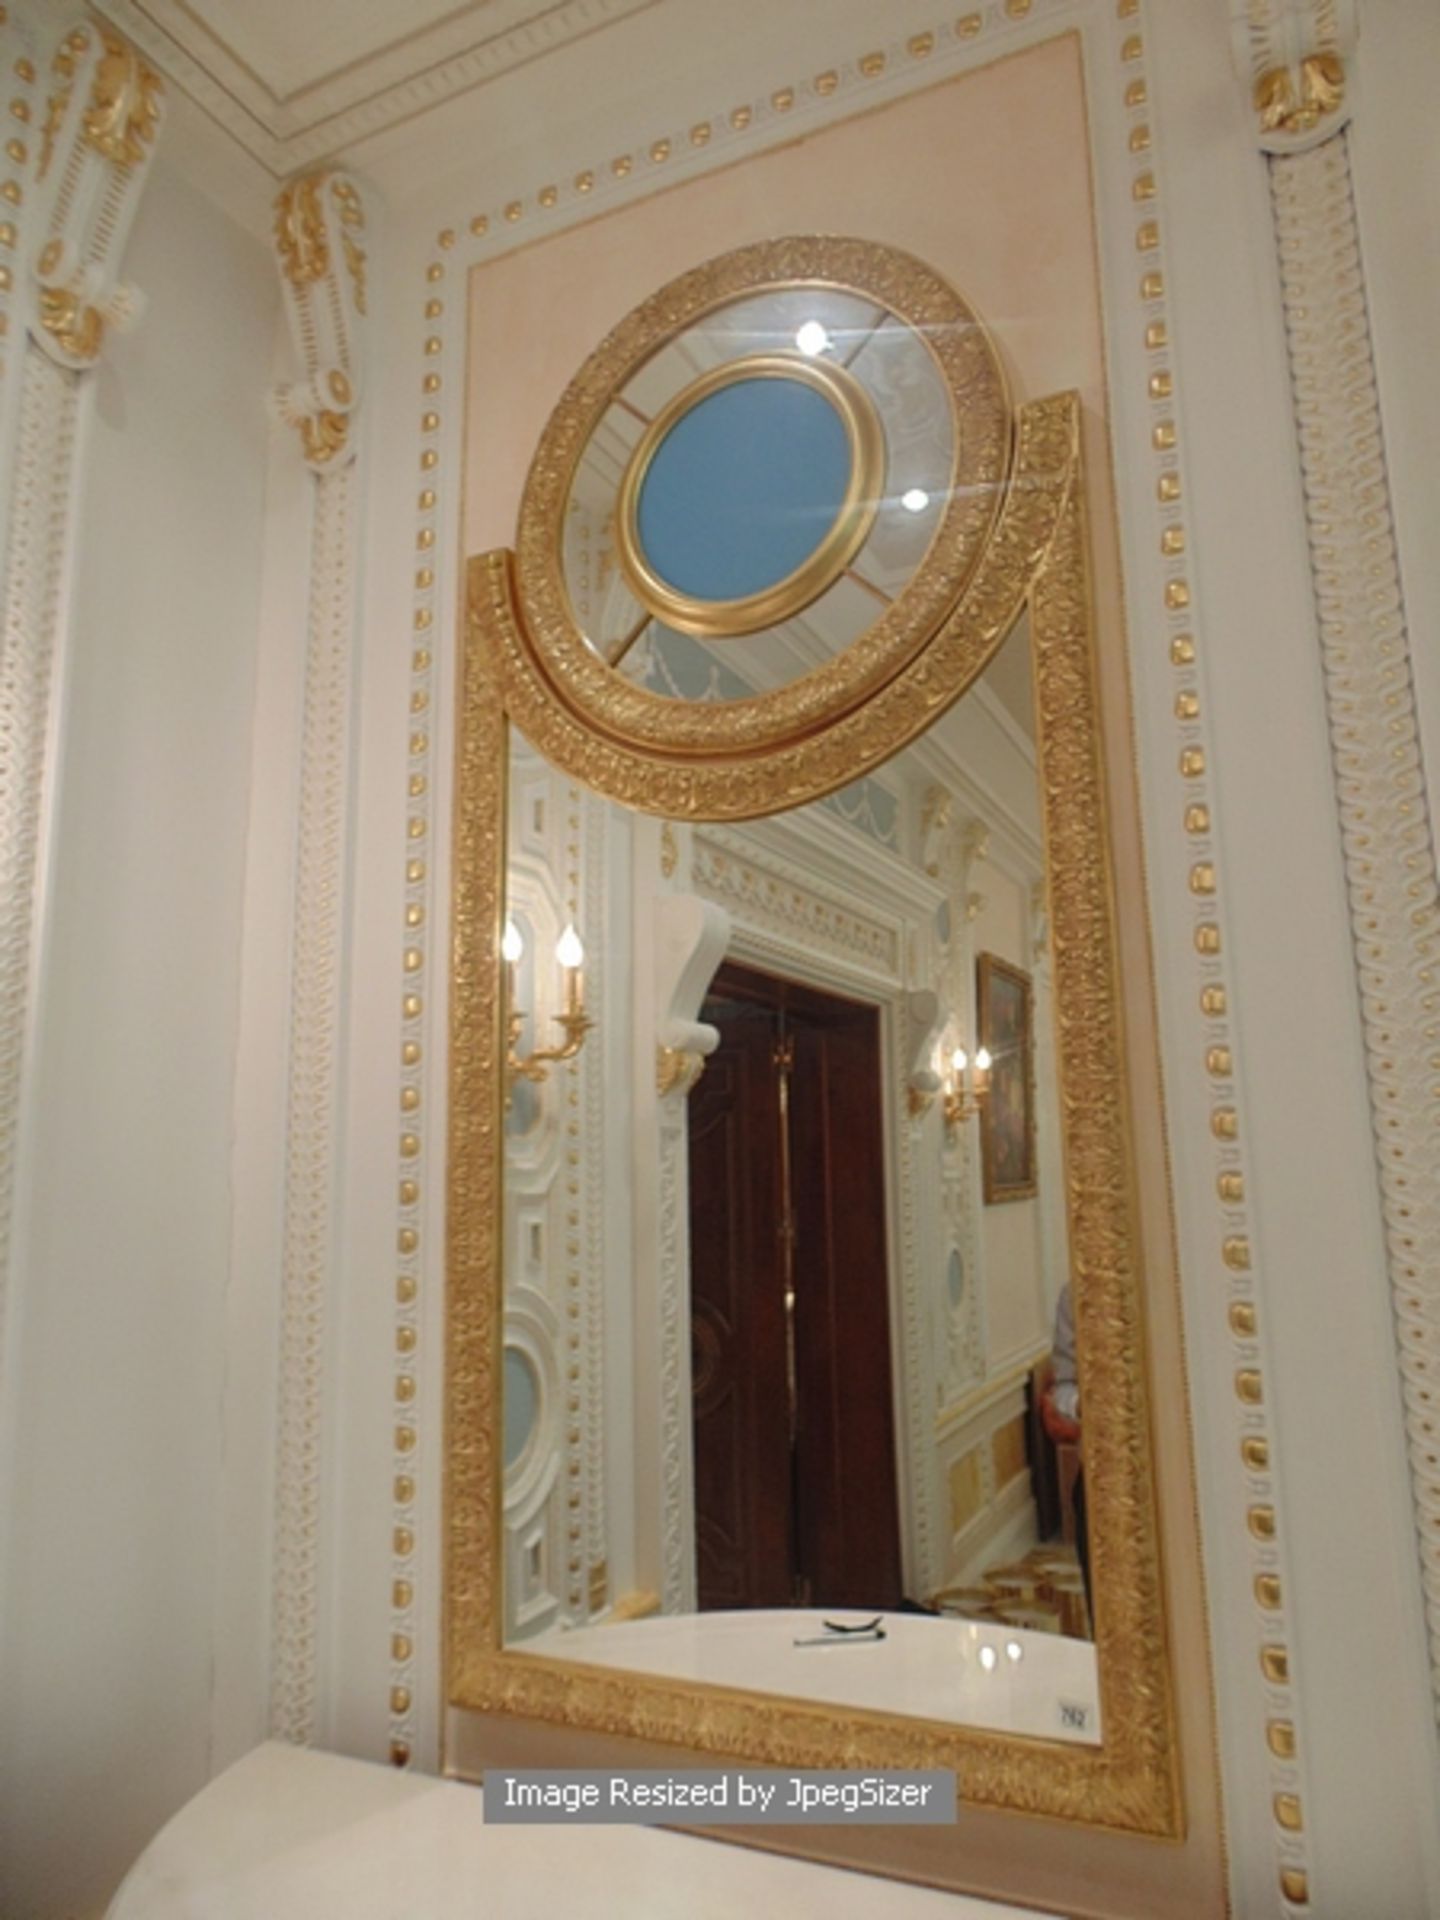 A neoclassical style carved and gilded mirror, a two part mirror with the main frame of the mirror